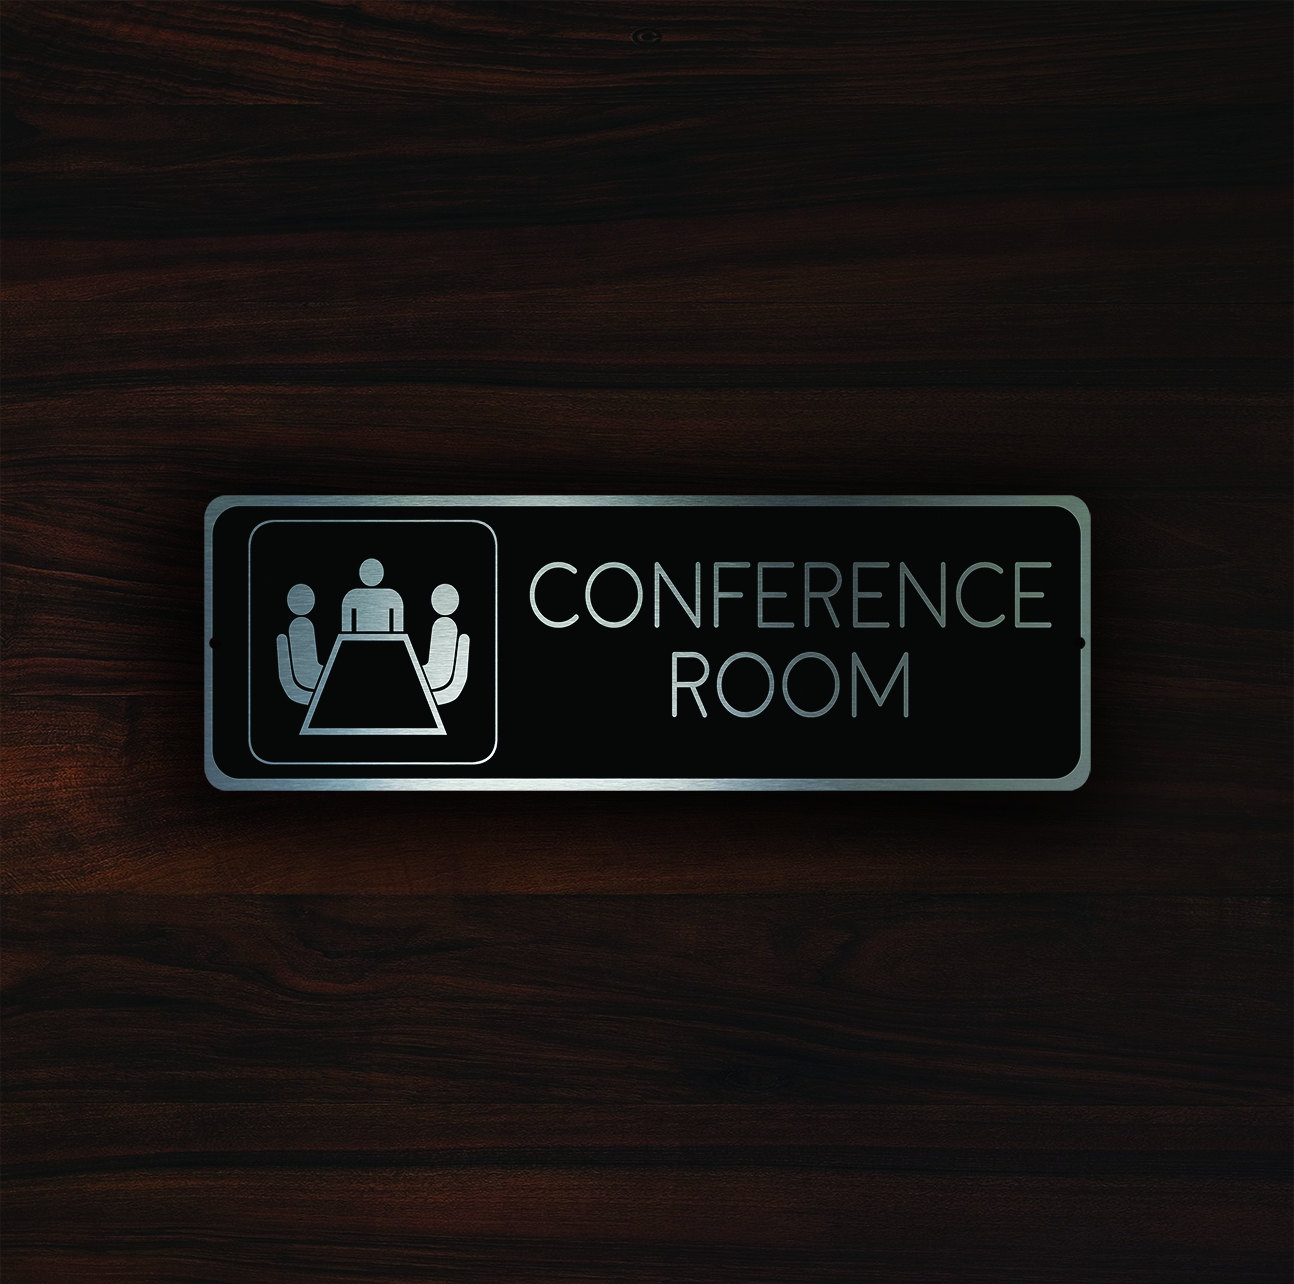 CONFERENCE ROOM SIGN